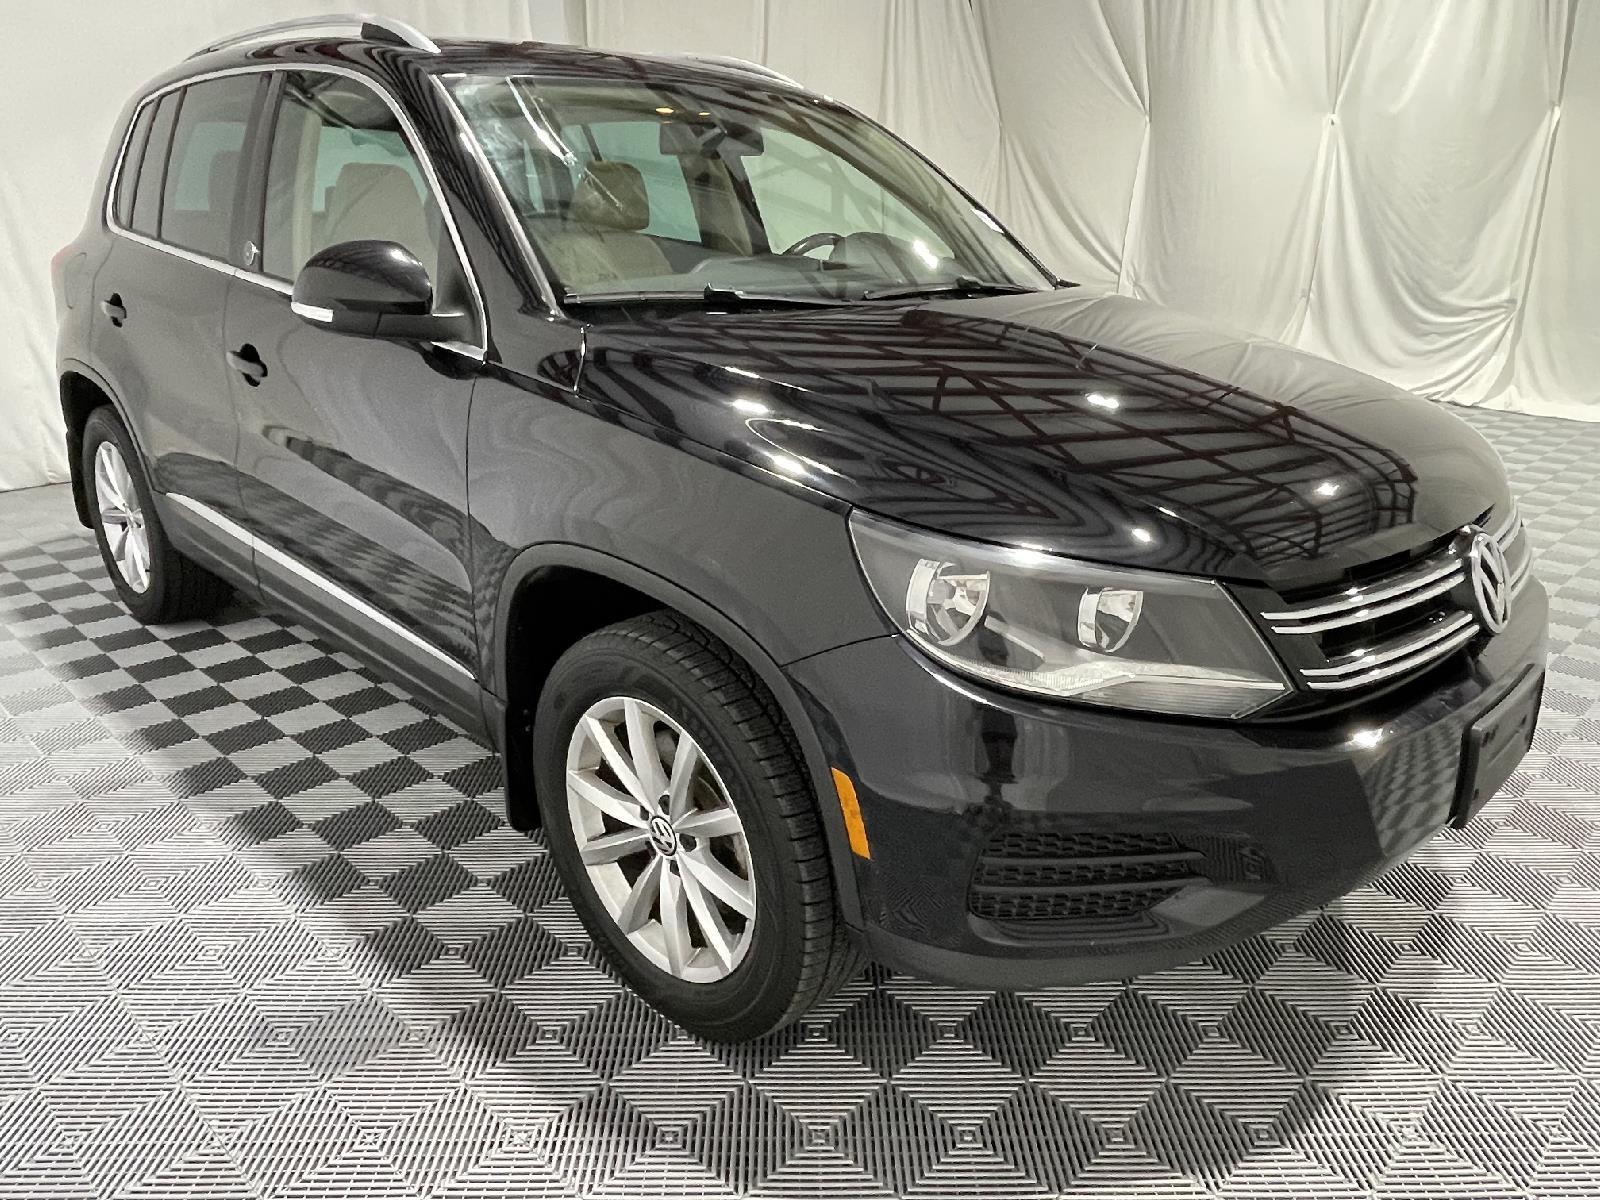 Used 2017 Volkswagen Tiguan Wolfsburg Edition 4motion for sale in St Joseph MO